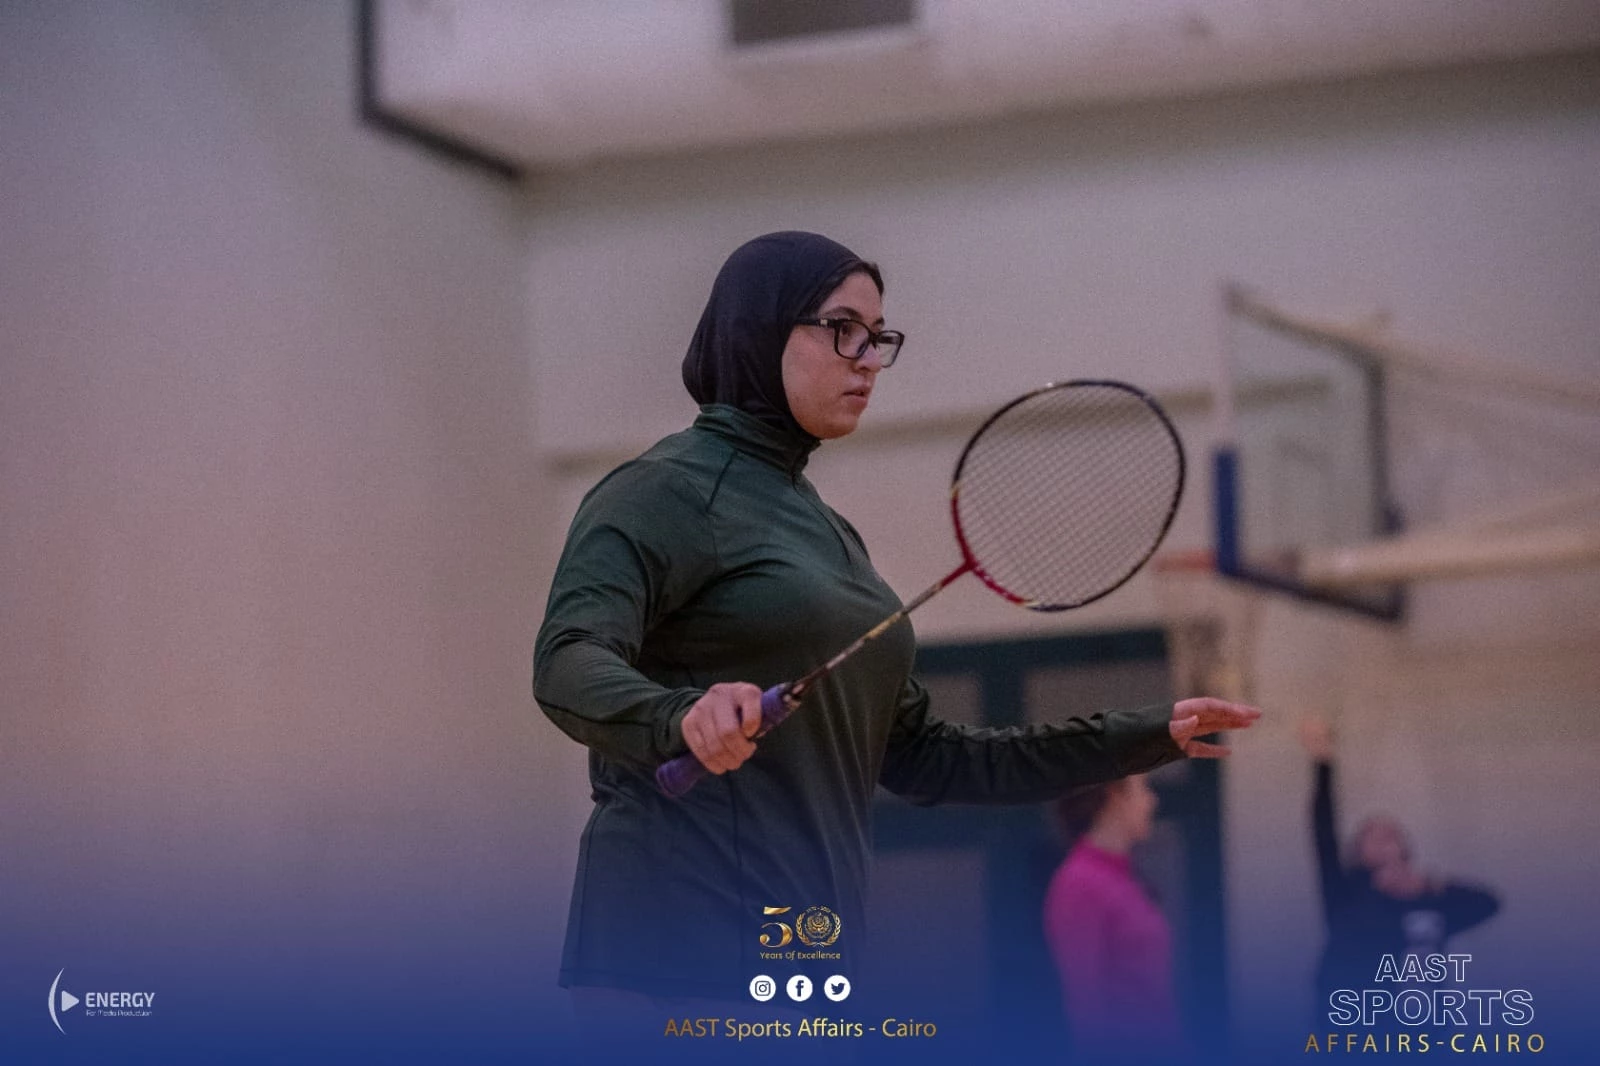 The national team of the Academy in Cairo for badminton is crowned the champion of the student championship and the runner-up of the student championship of the fifth sector of private universities3